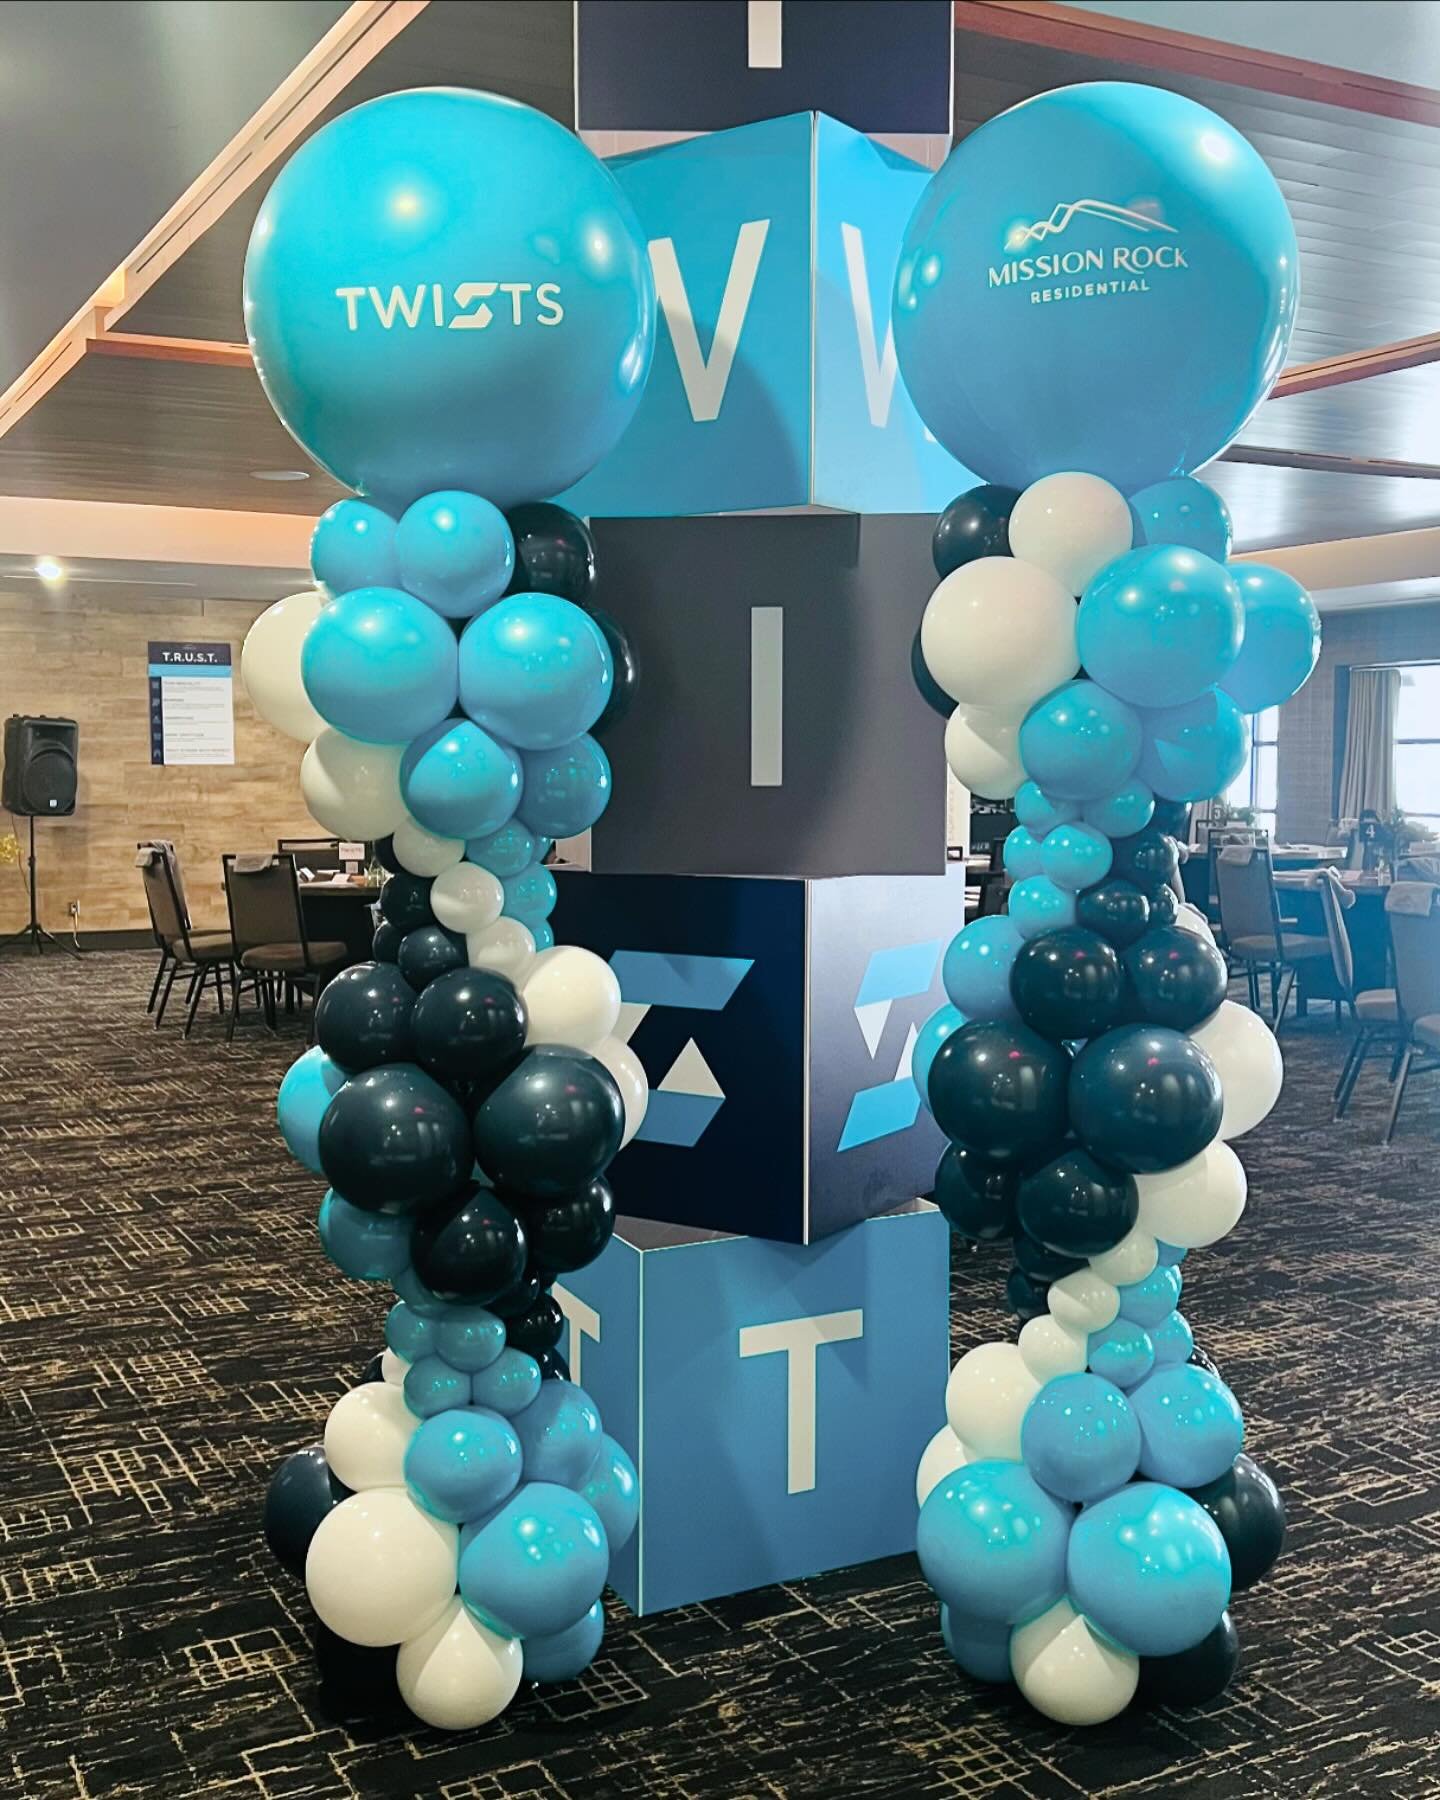 These bubble columns were the perfect design to reflect the theme of Mission Rocks  corporate event&hellip; Twists and Turns!
.
.
.
. #balloontower #balloon #birthdayballoons #birthday🎂 #balloons #organic balloons #balloonprofessional #balloonmosaic